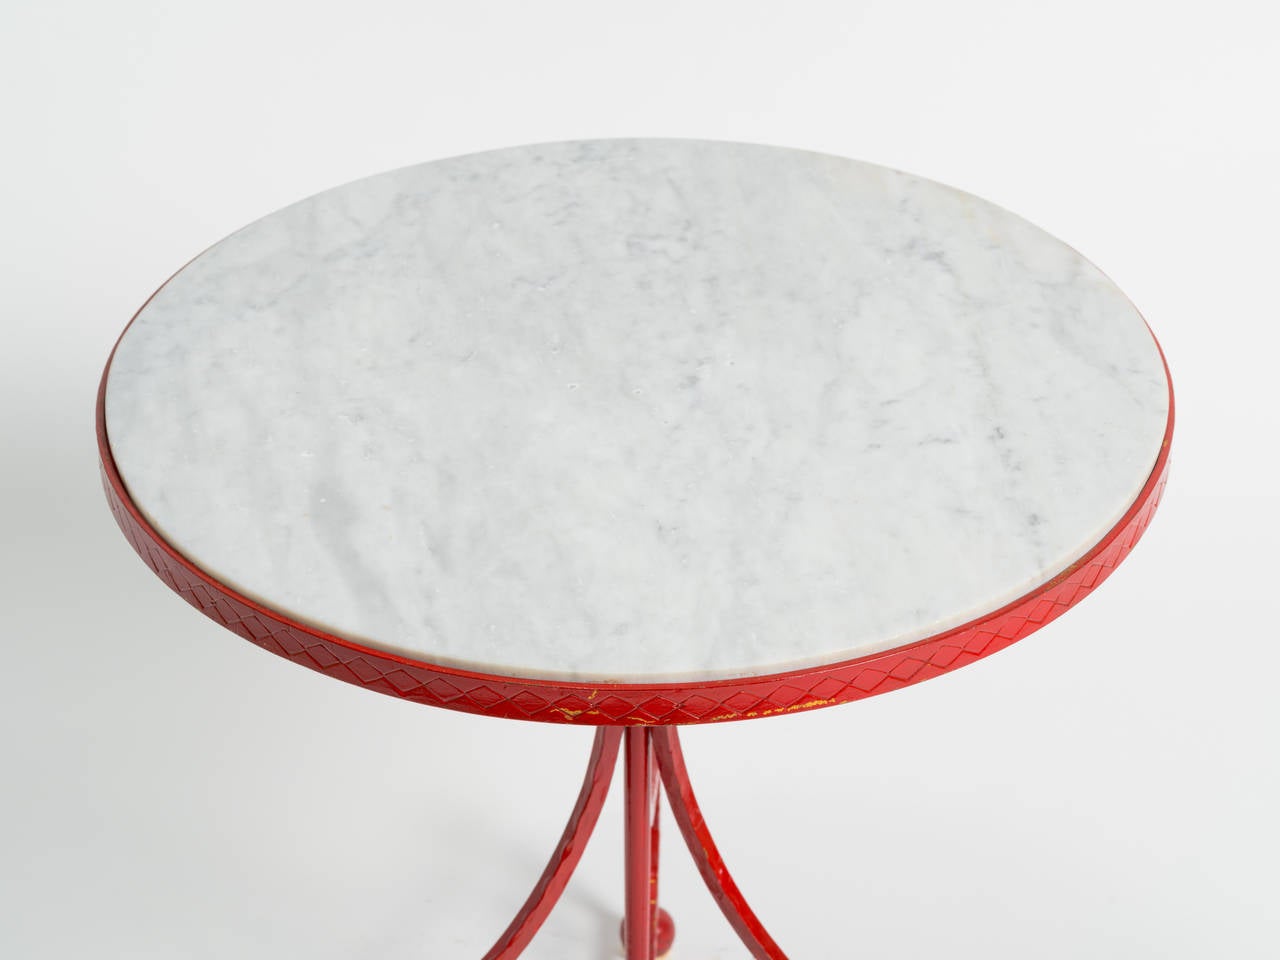 Originally gilded, a designer in the 1970s painted thisItalian  iron table red.